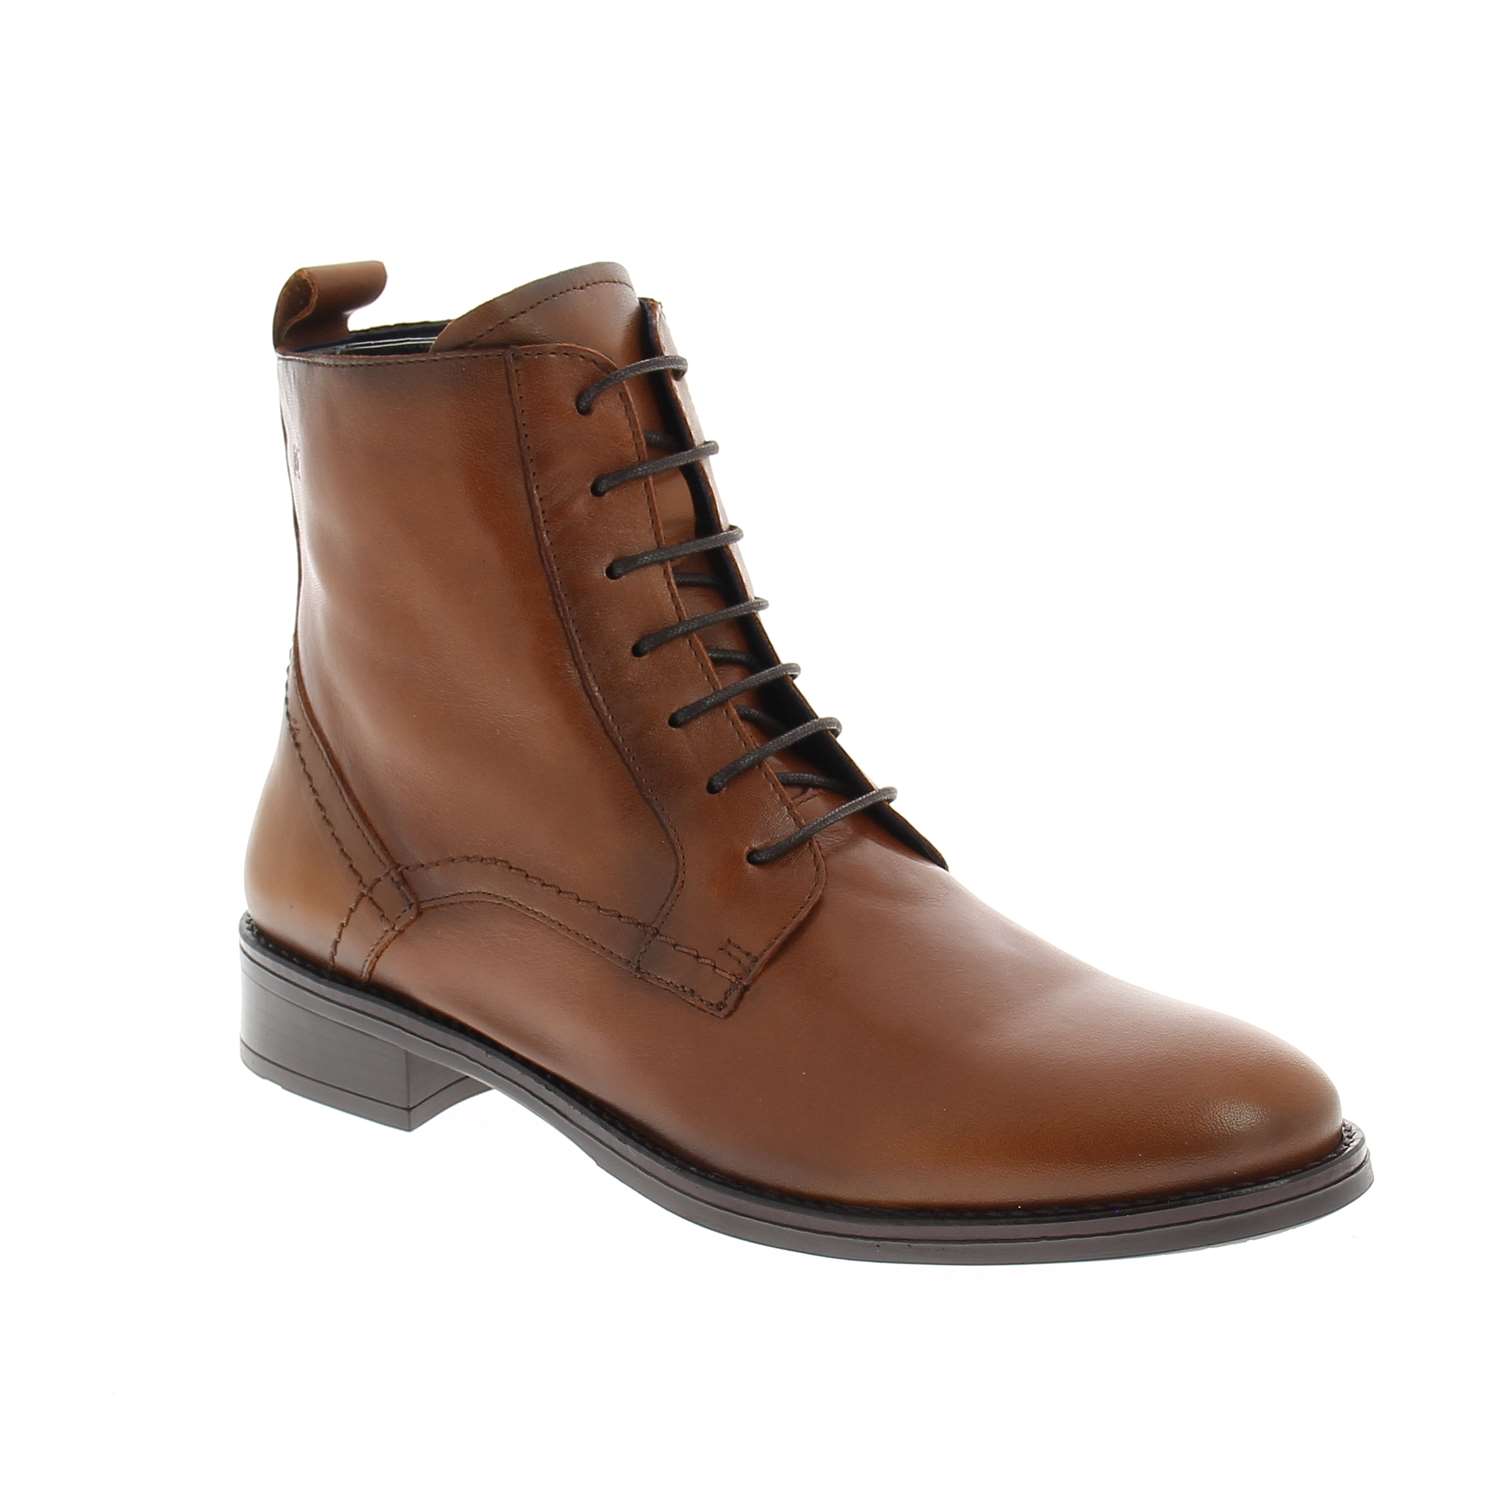 01 - DOSEPTO -  - Boots et bottines - Cuir